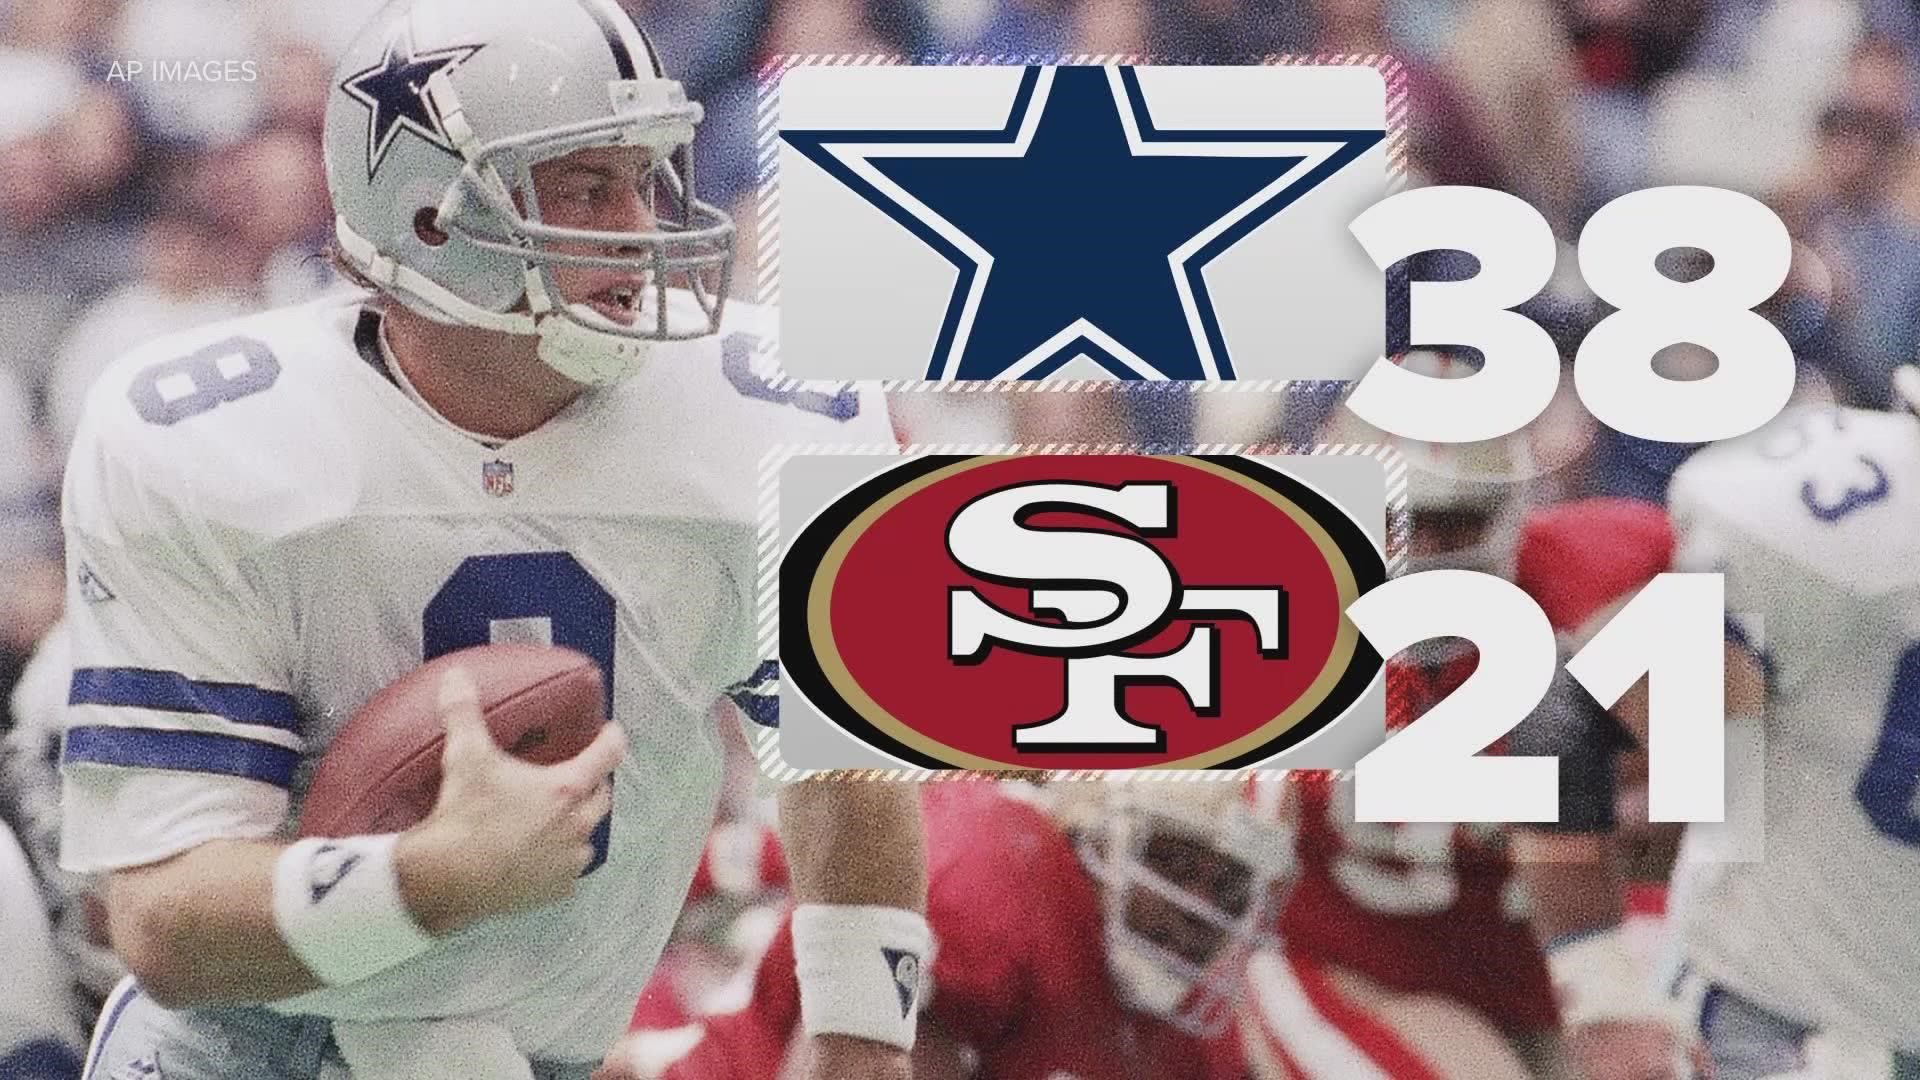 The Dallas Cowboys play the San Francisco 49ers in the NFC Divisional Round on Sunday night. It will be another big matchup in a storied rivalry.